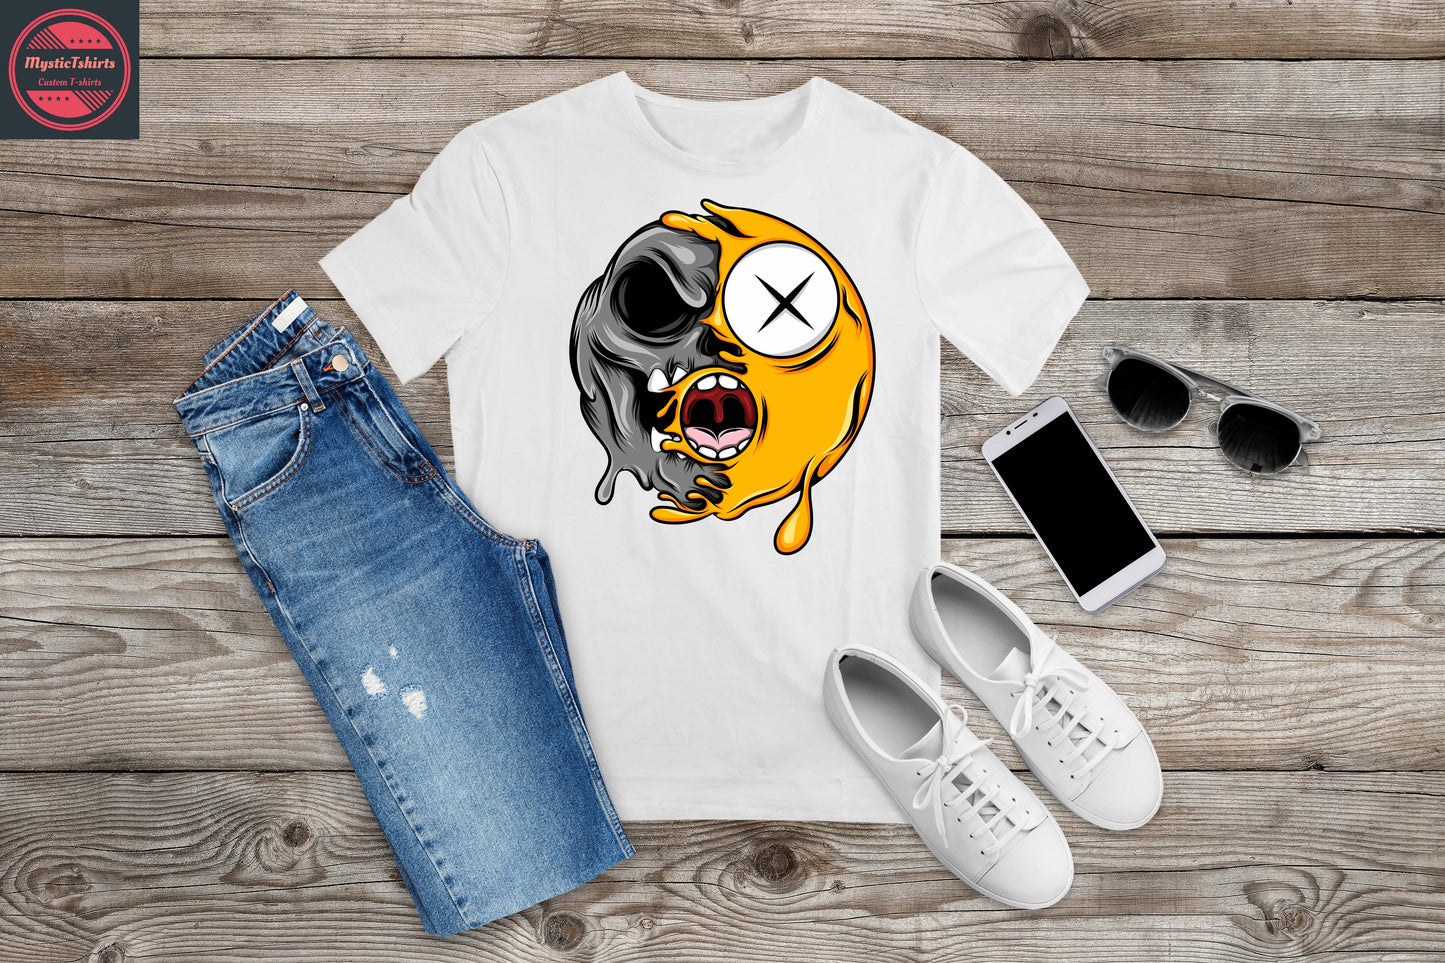 067. CRAZY FACE, Personalized T-Shirt, Custom Text, Make Your Own Shirt, Custom Tee